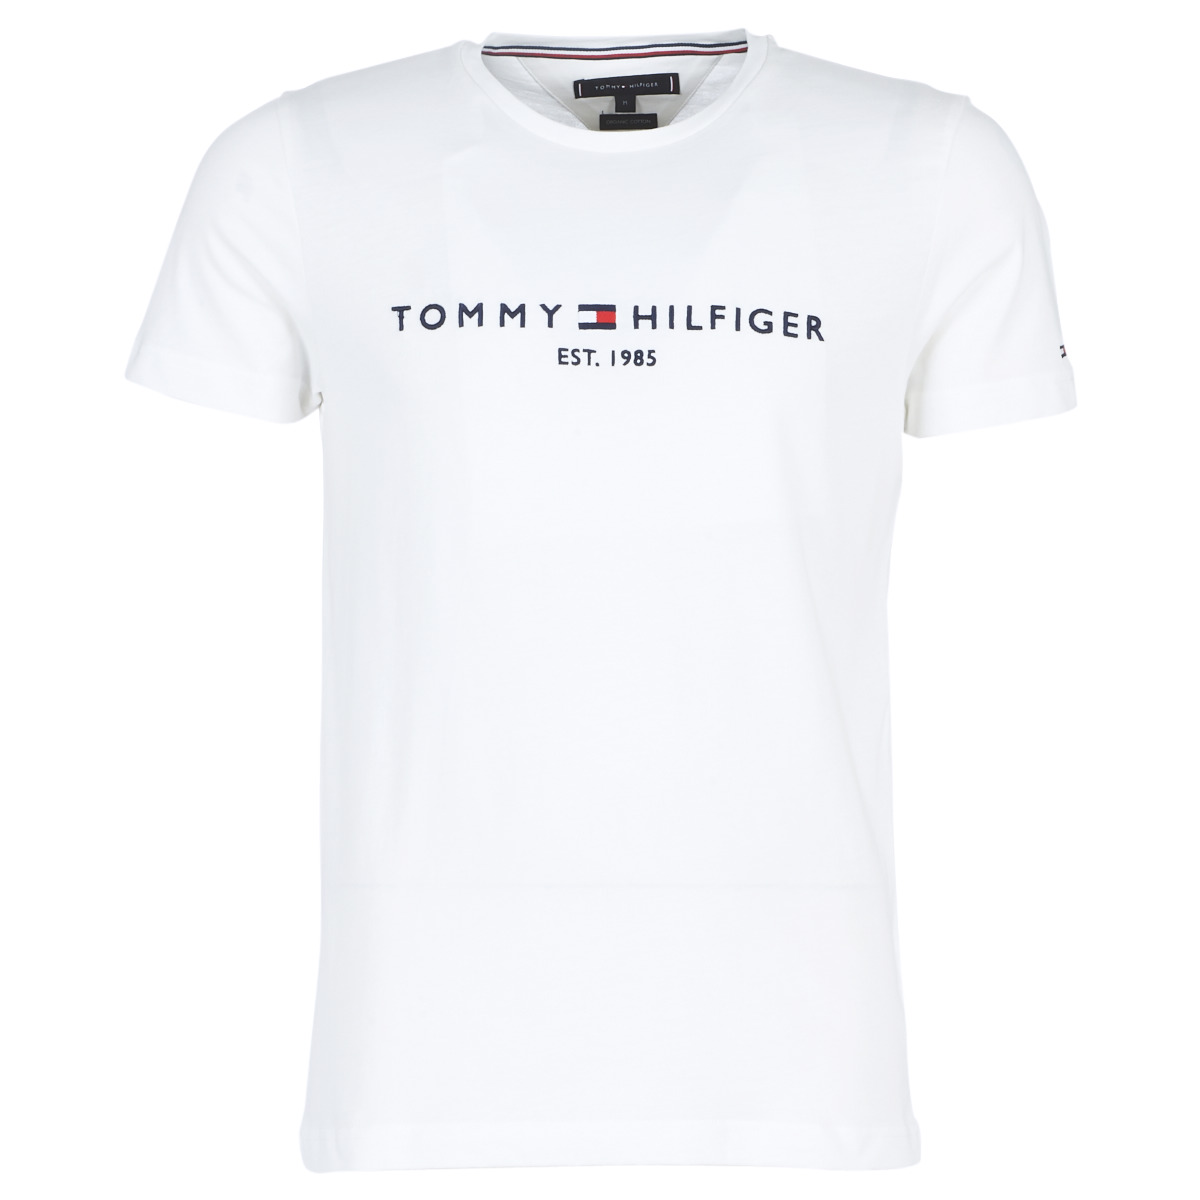 Camiseta Tommy Hilfiger Baby Apple Red